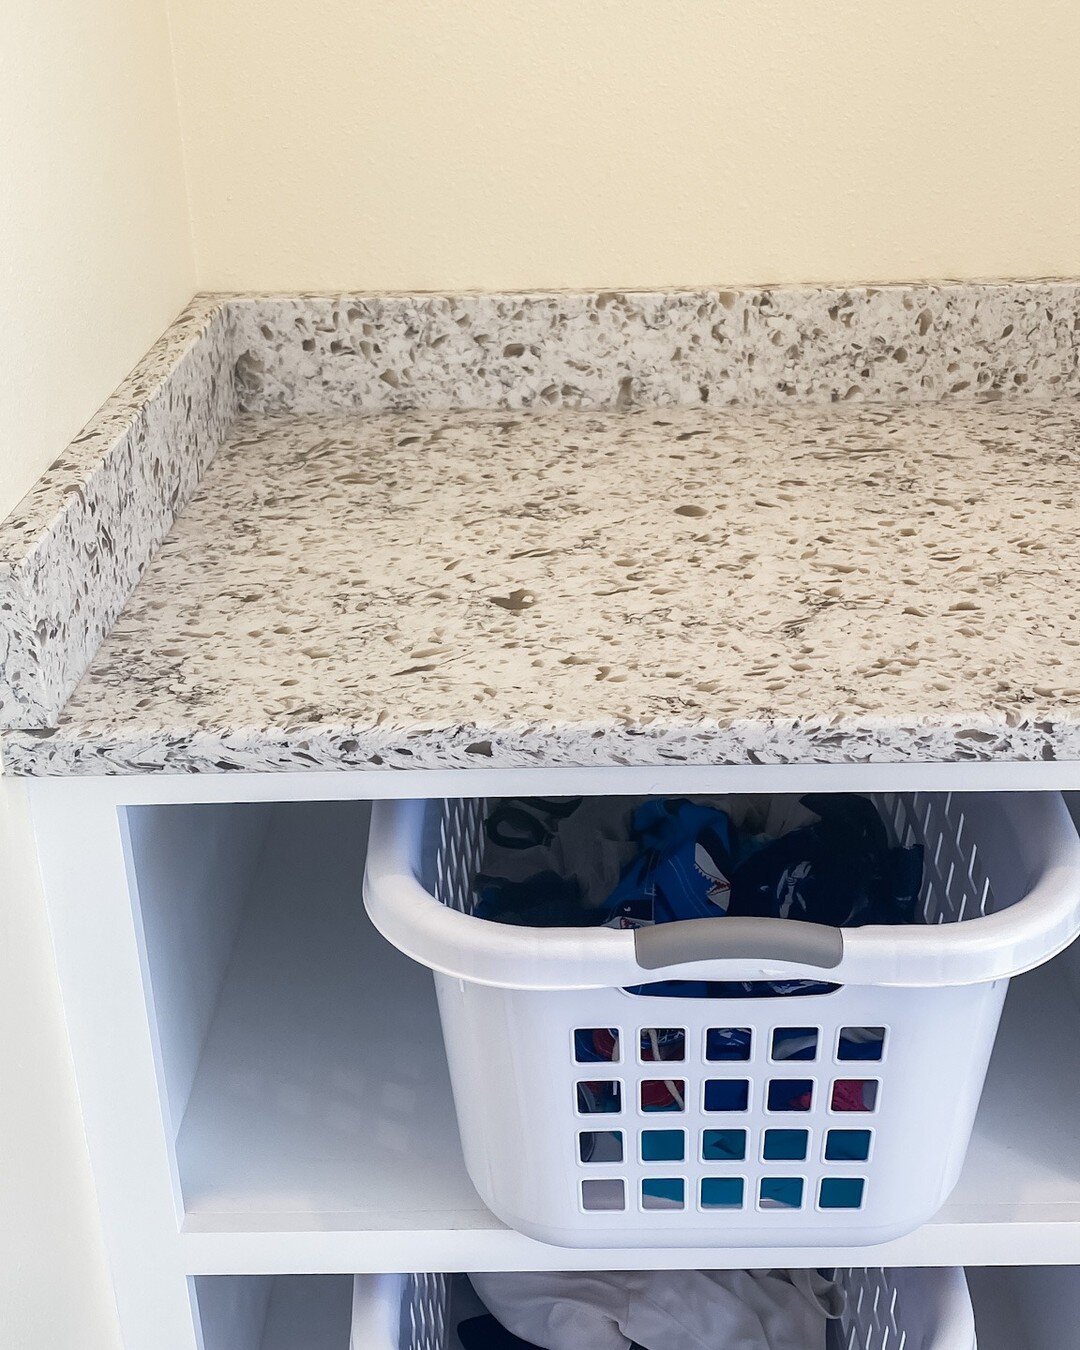 1️⃣ This countertop is to die for.
2️⃣ This laundry basket built in in genius. 
3️⃣ This laundry station is perfect for dirt clothes and then folding clothes. 

We are rethinking our laundry rooms after seeing this, how about you?